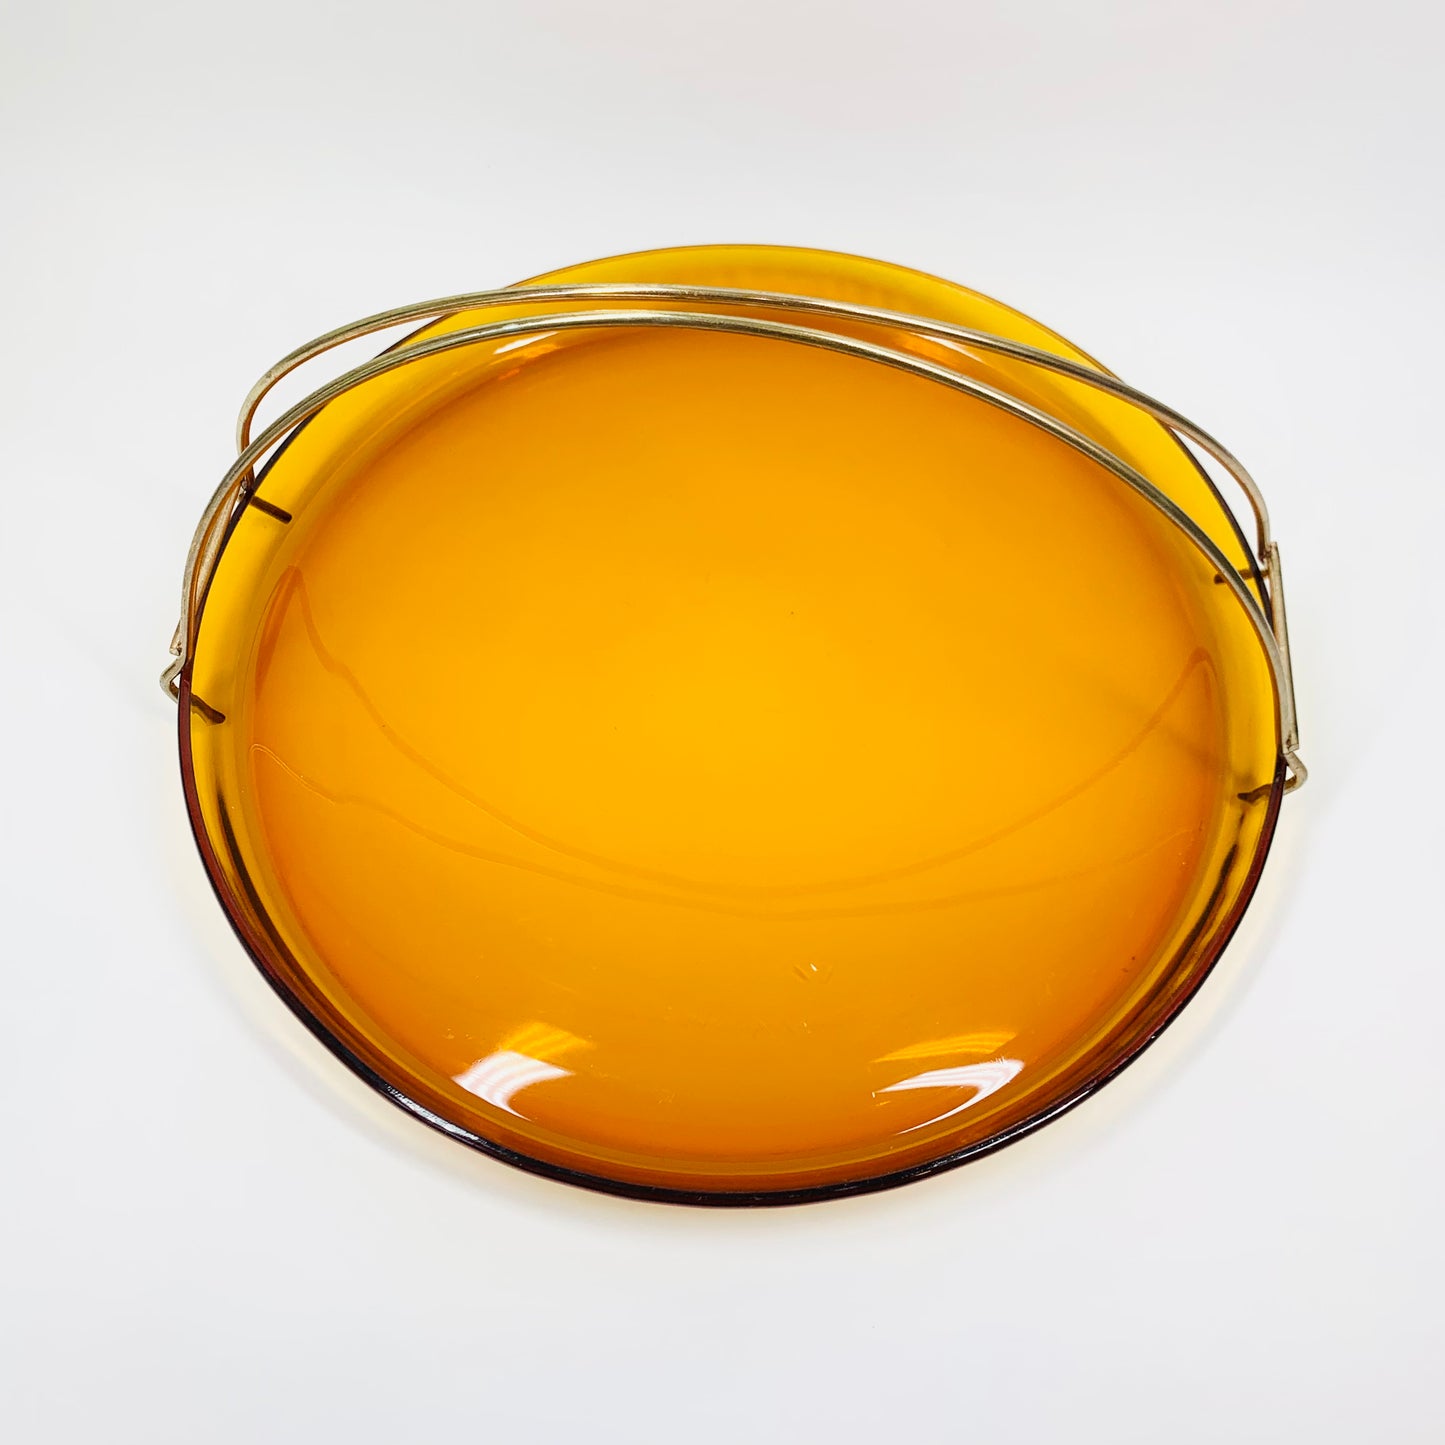 Large Midcentury amber glass serving plate with metal handle